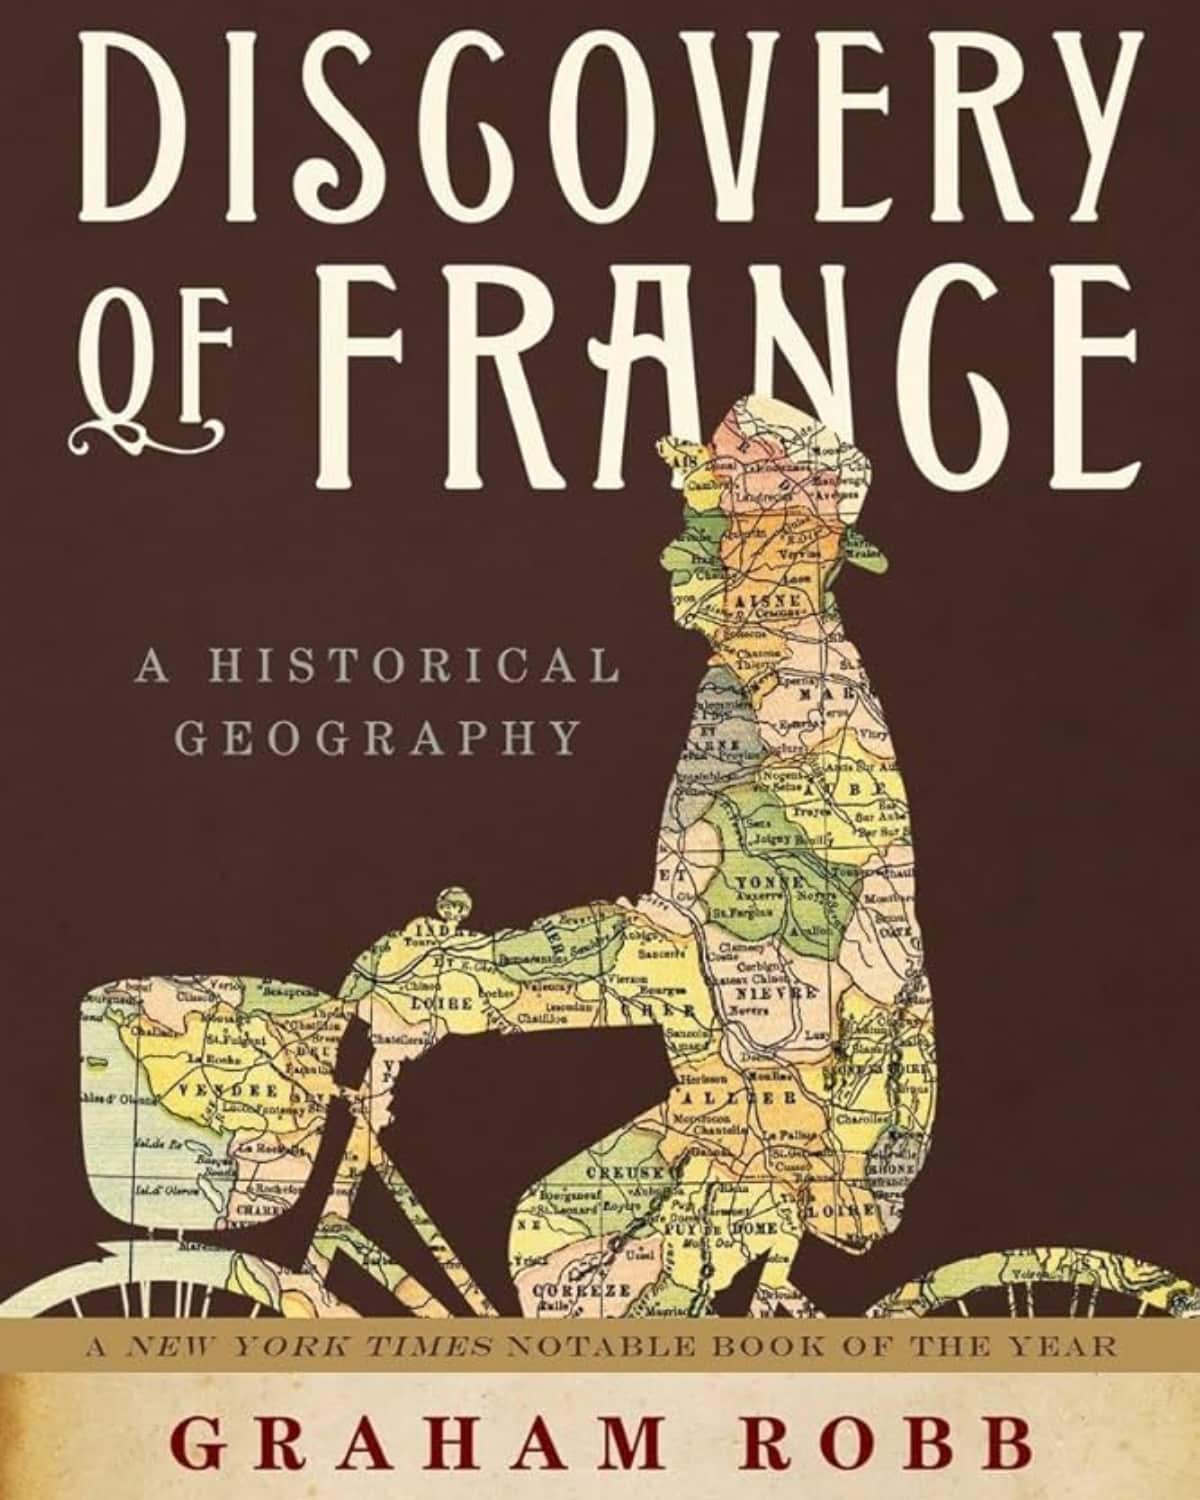 The Discovery of France: A Historical Geography, from the Revolution to the First World War by Graham Robb book cover with man on a cycle